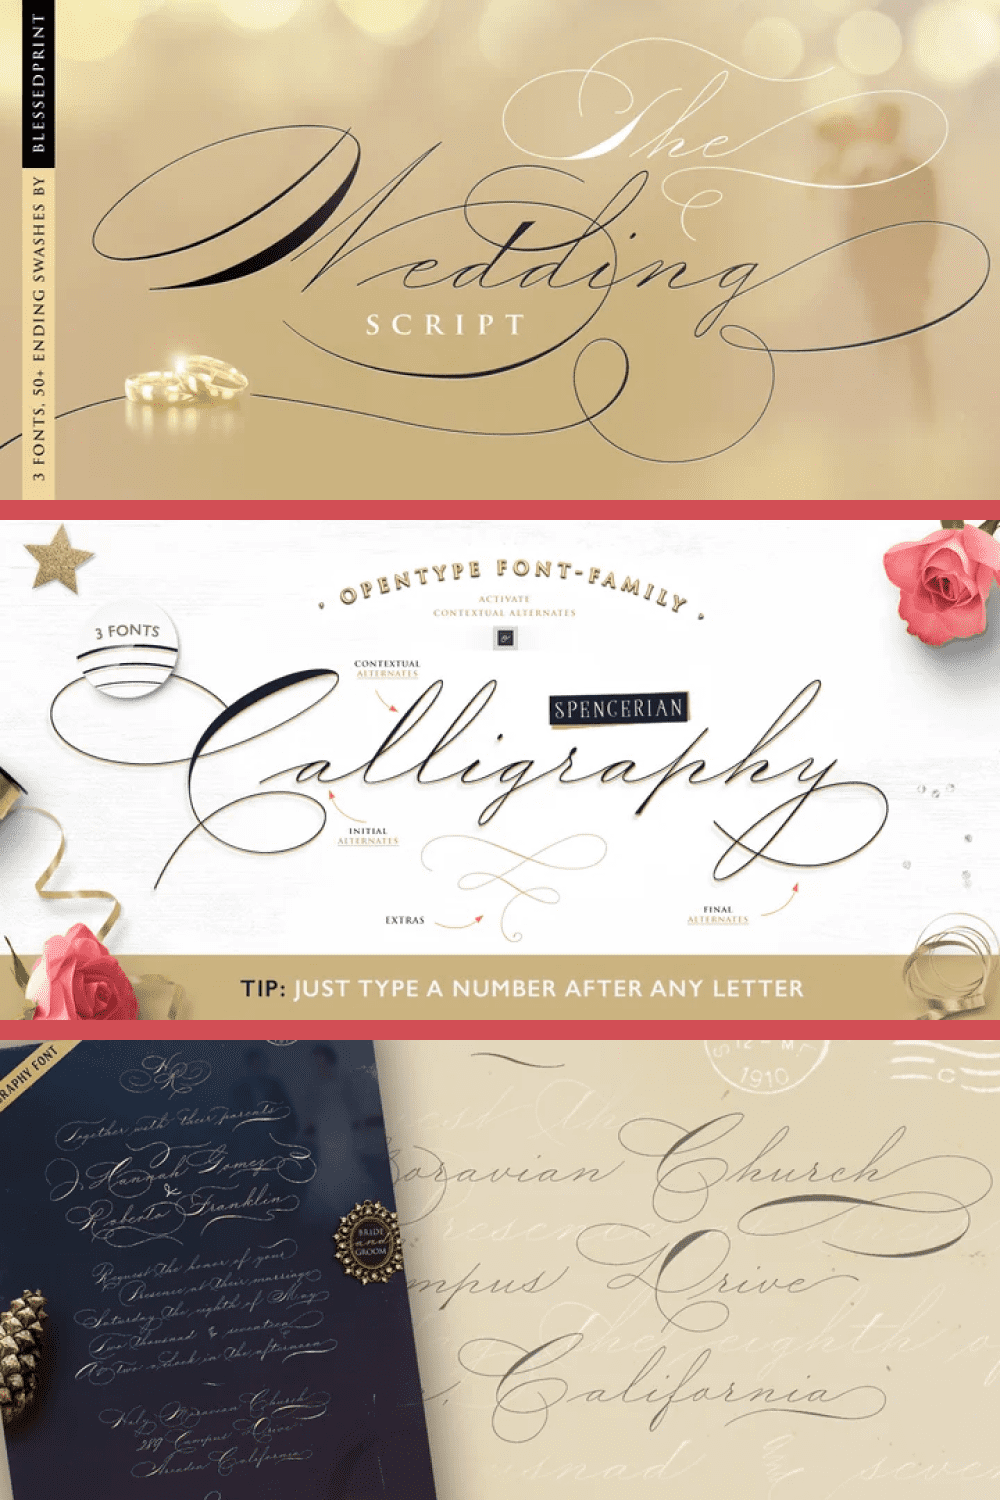 This font is as close to ideal for weddings as possible. It symbolizes the rings of the bride and groom.